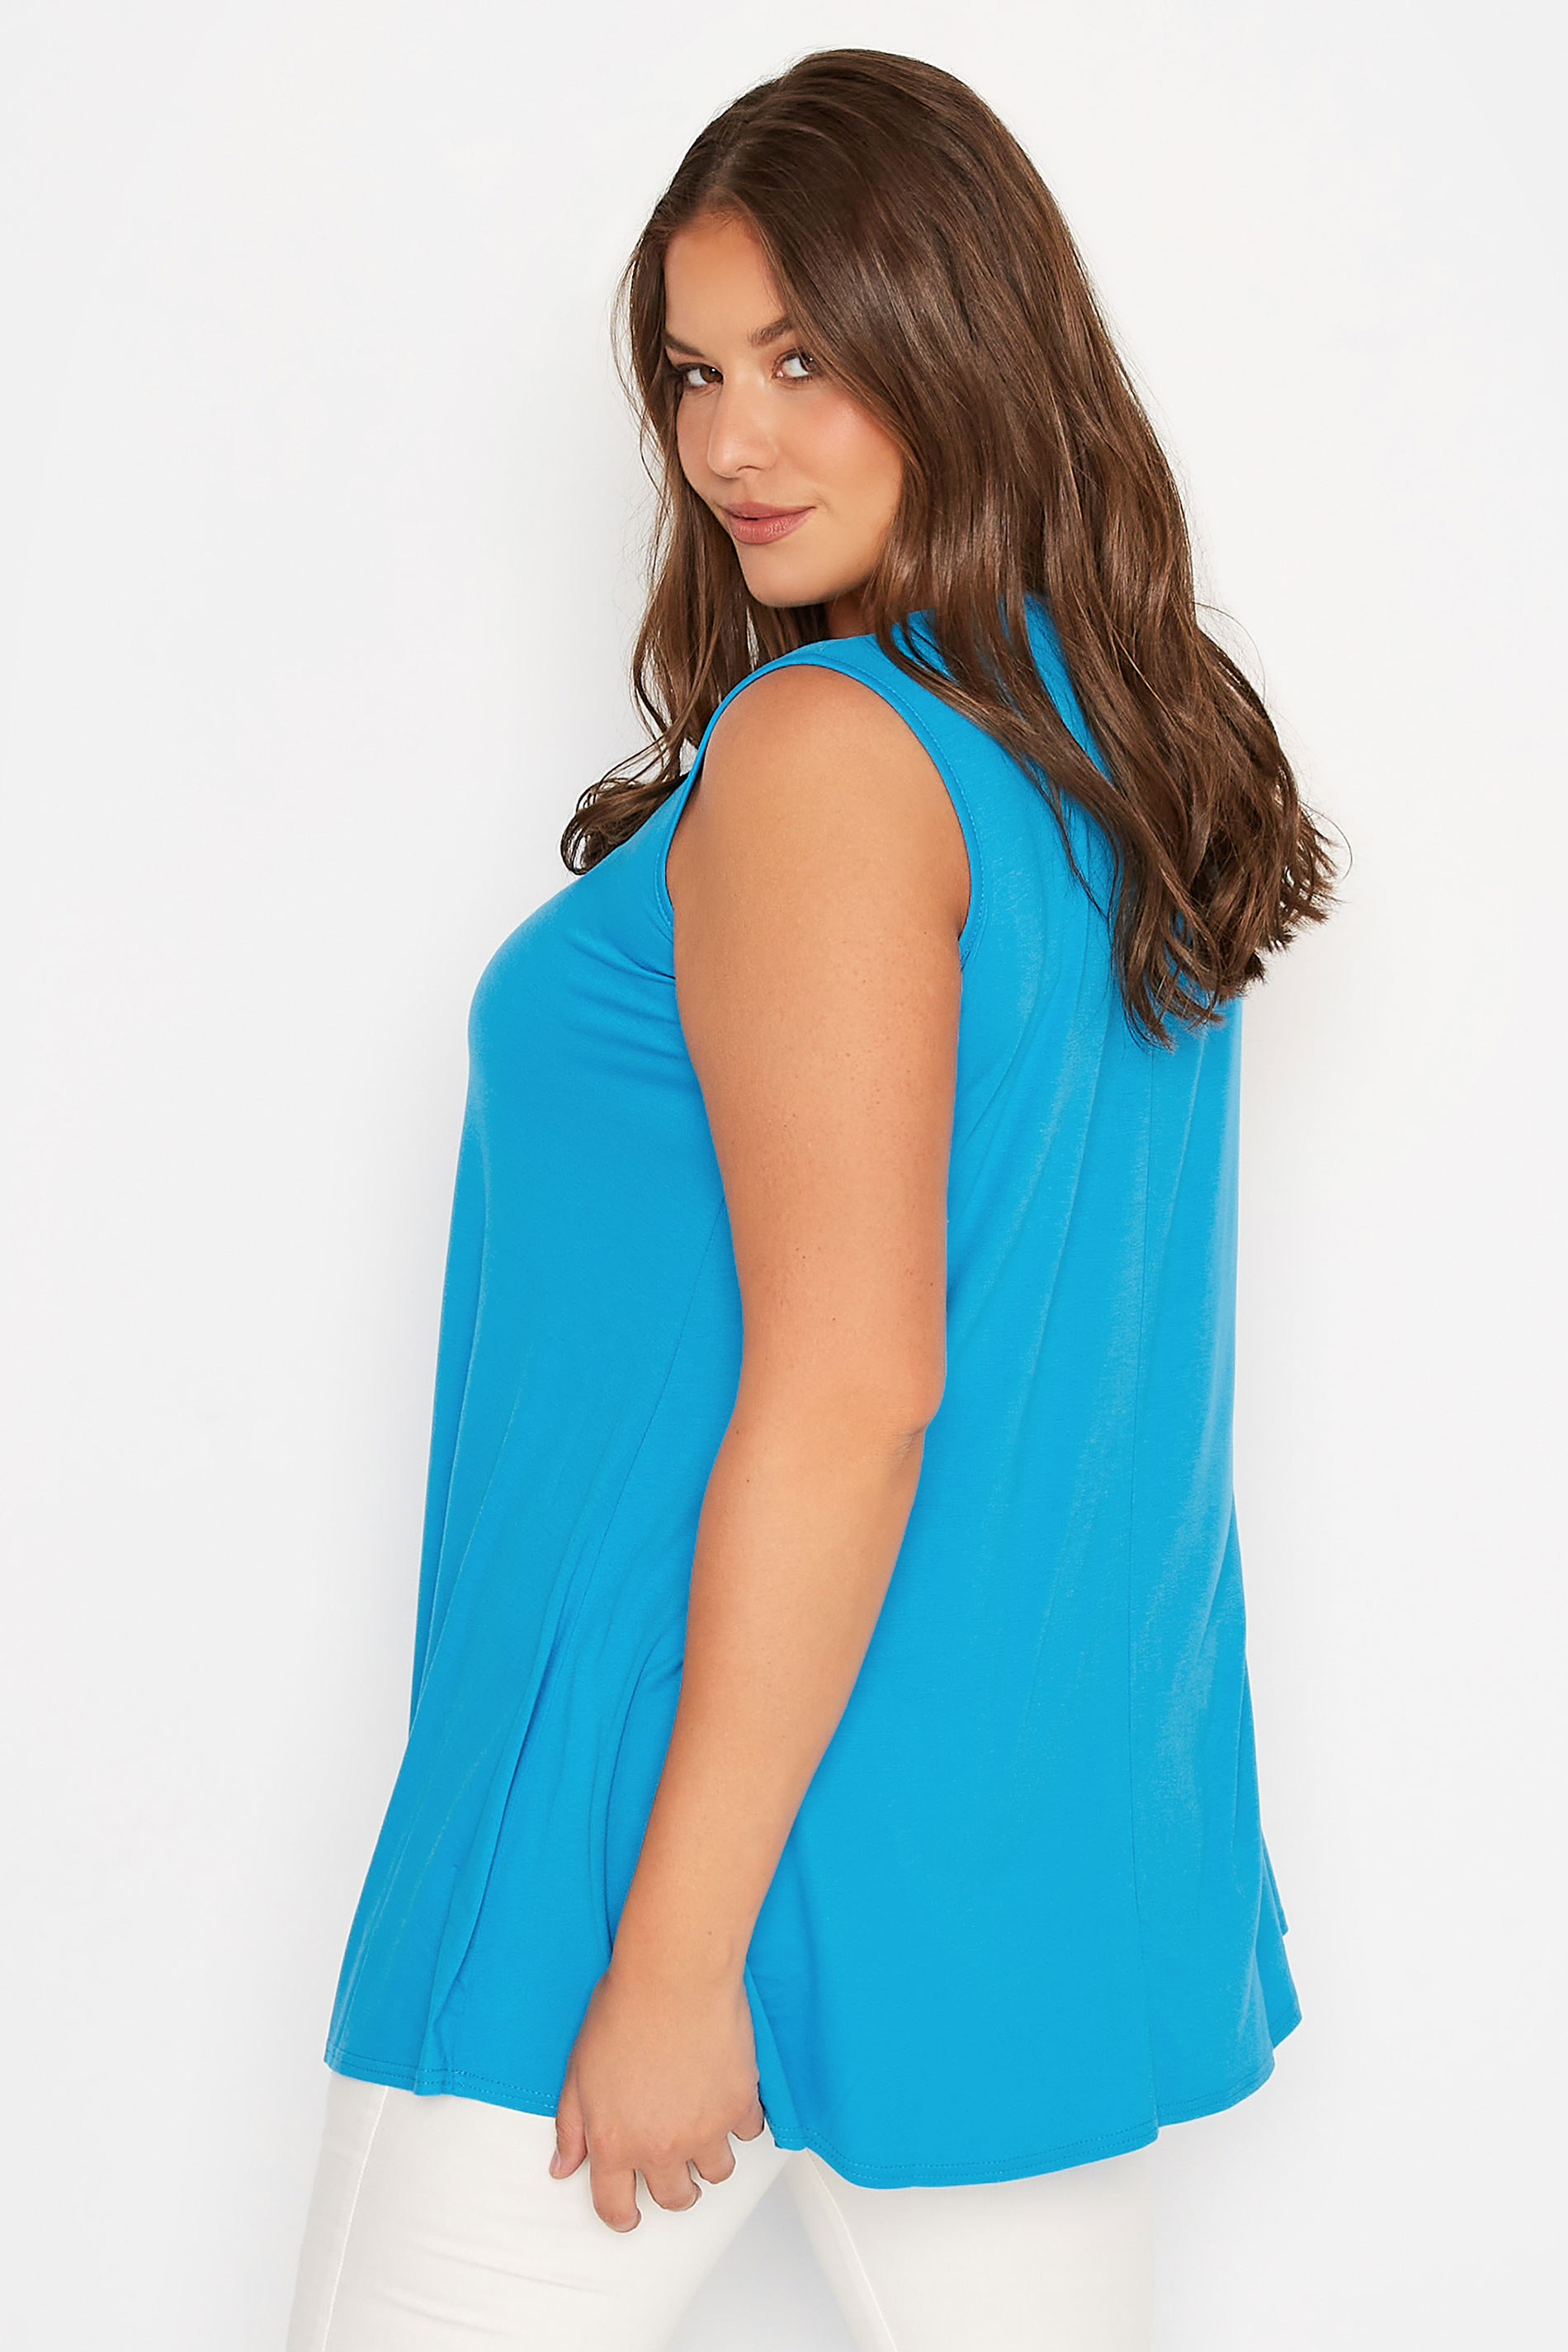 Grande taille  Tops Grande taille  Tops Casual | Curve Turquoise Blue Swing Vest Top - ZS03221